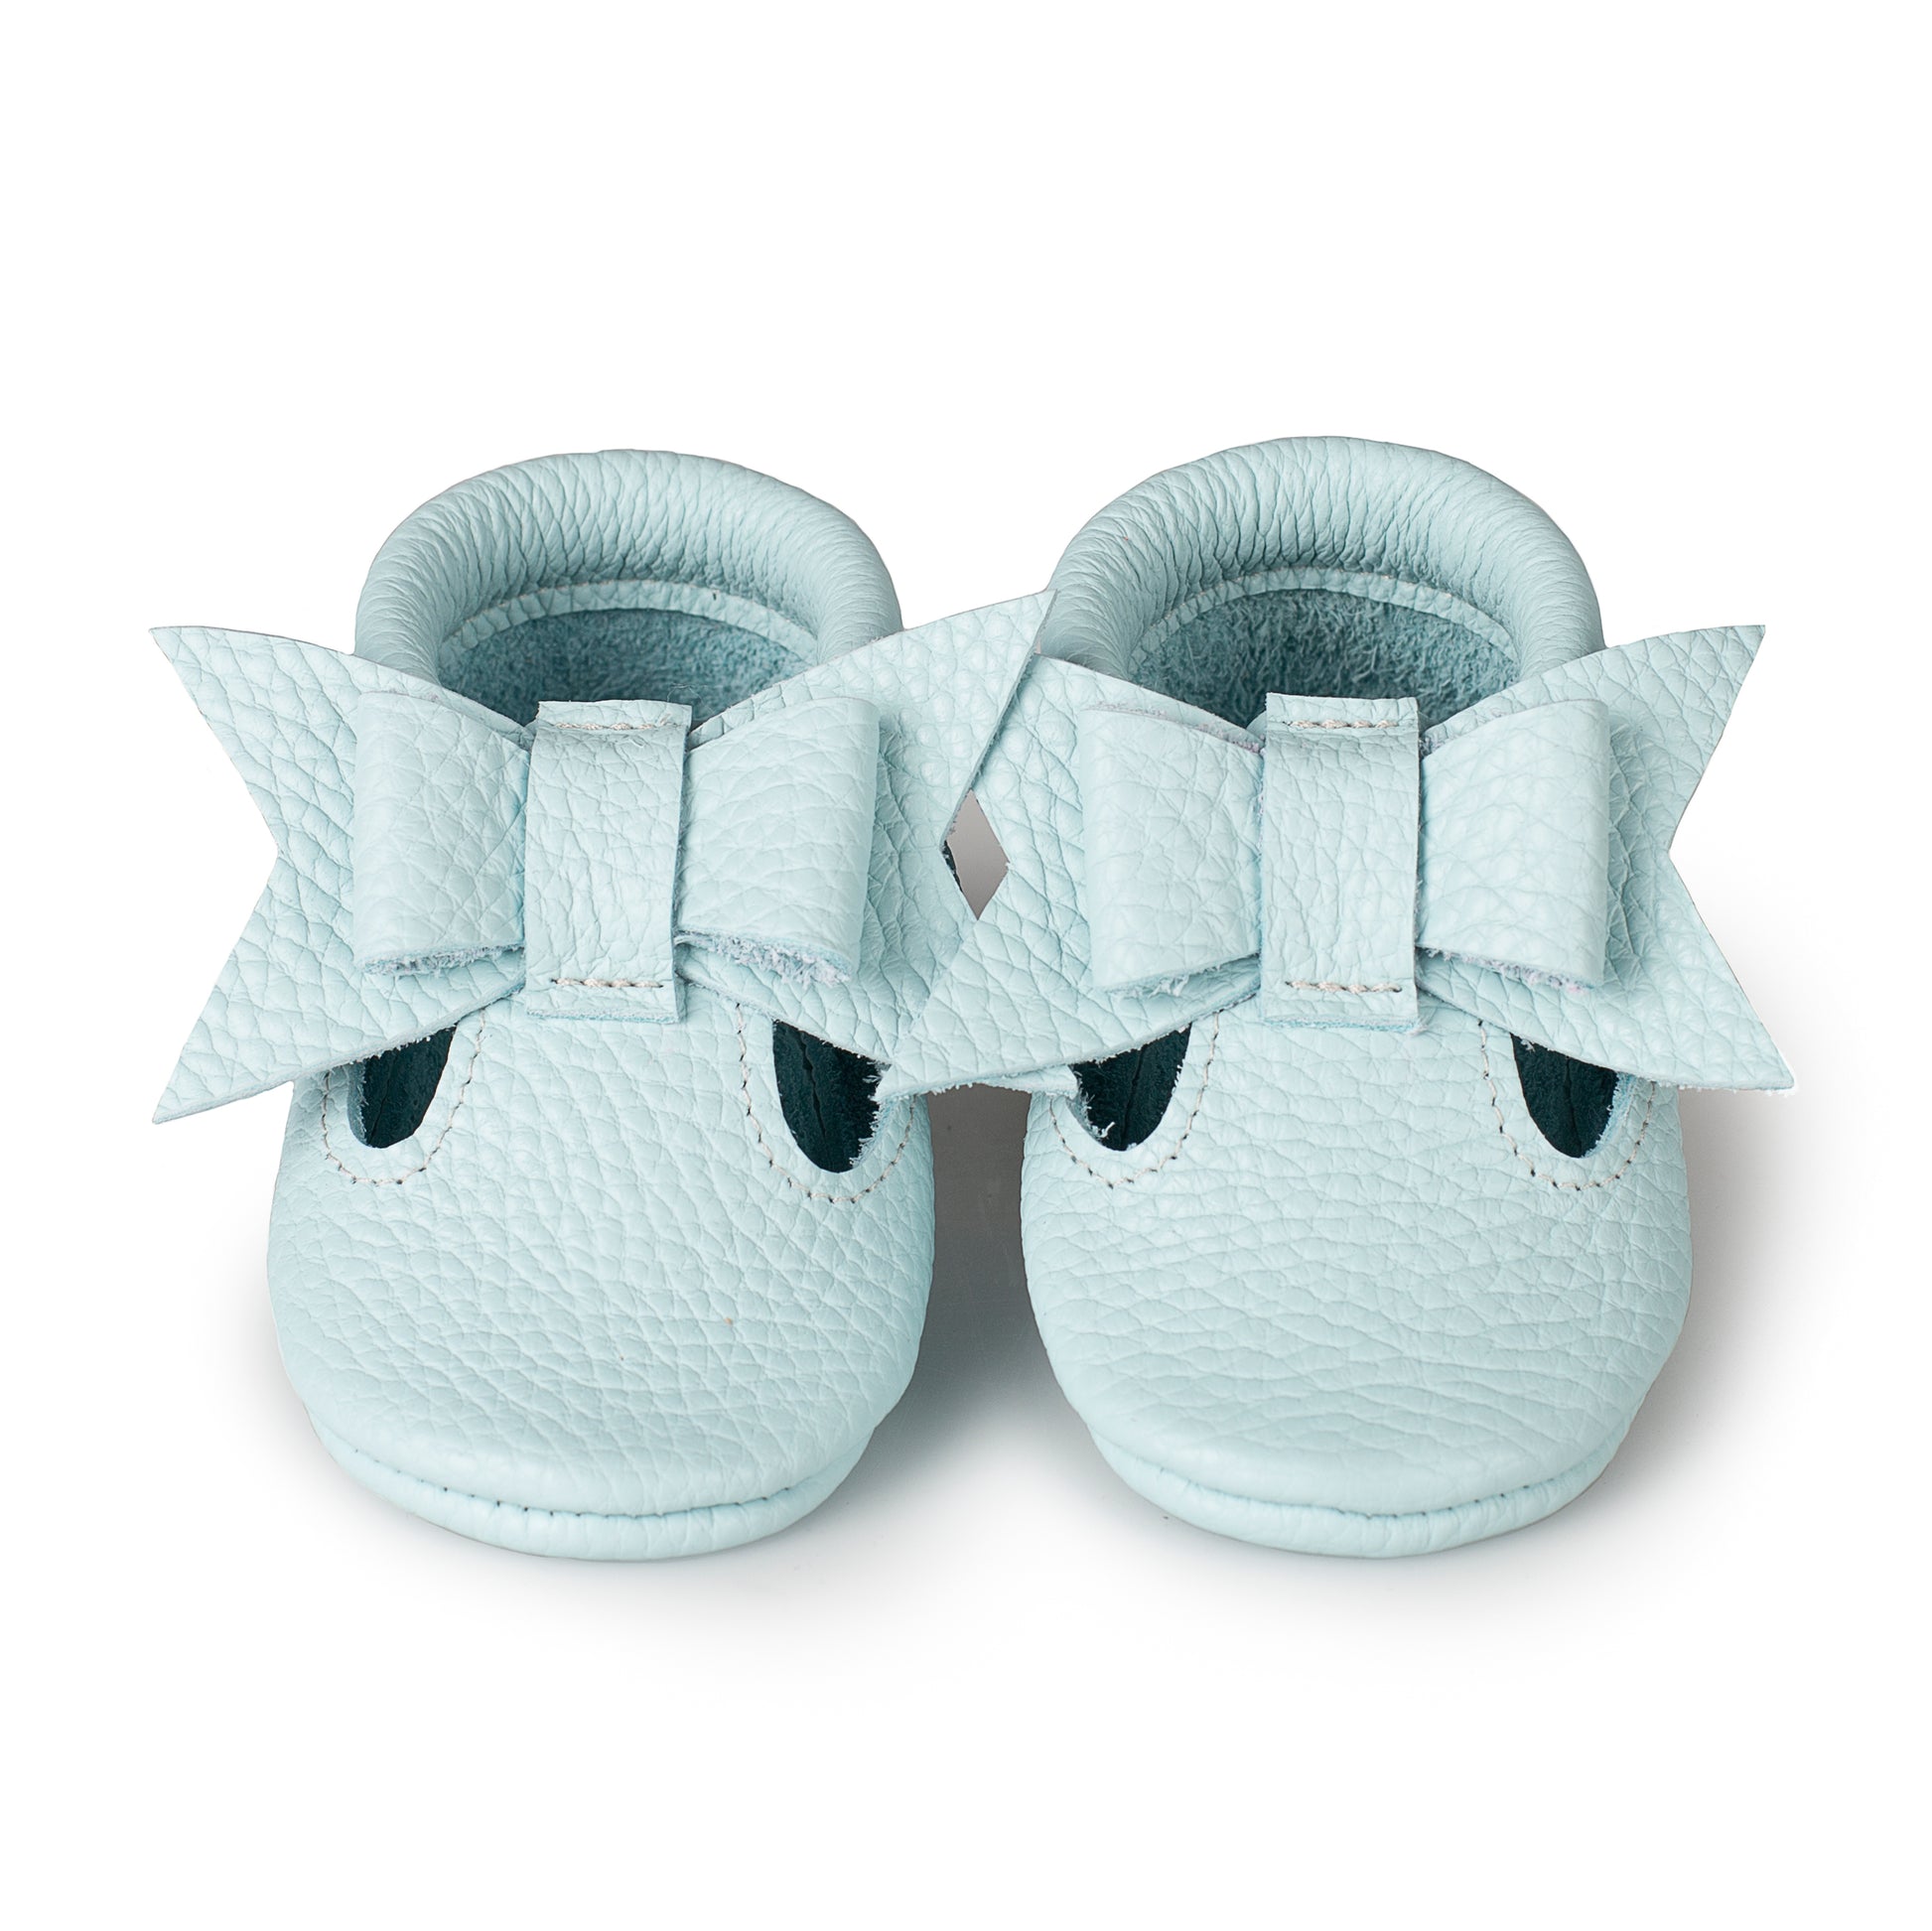 Baby Walking Shoes